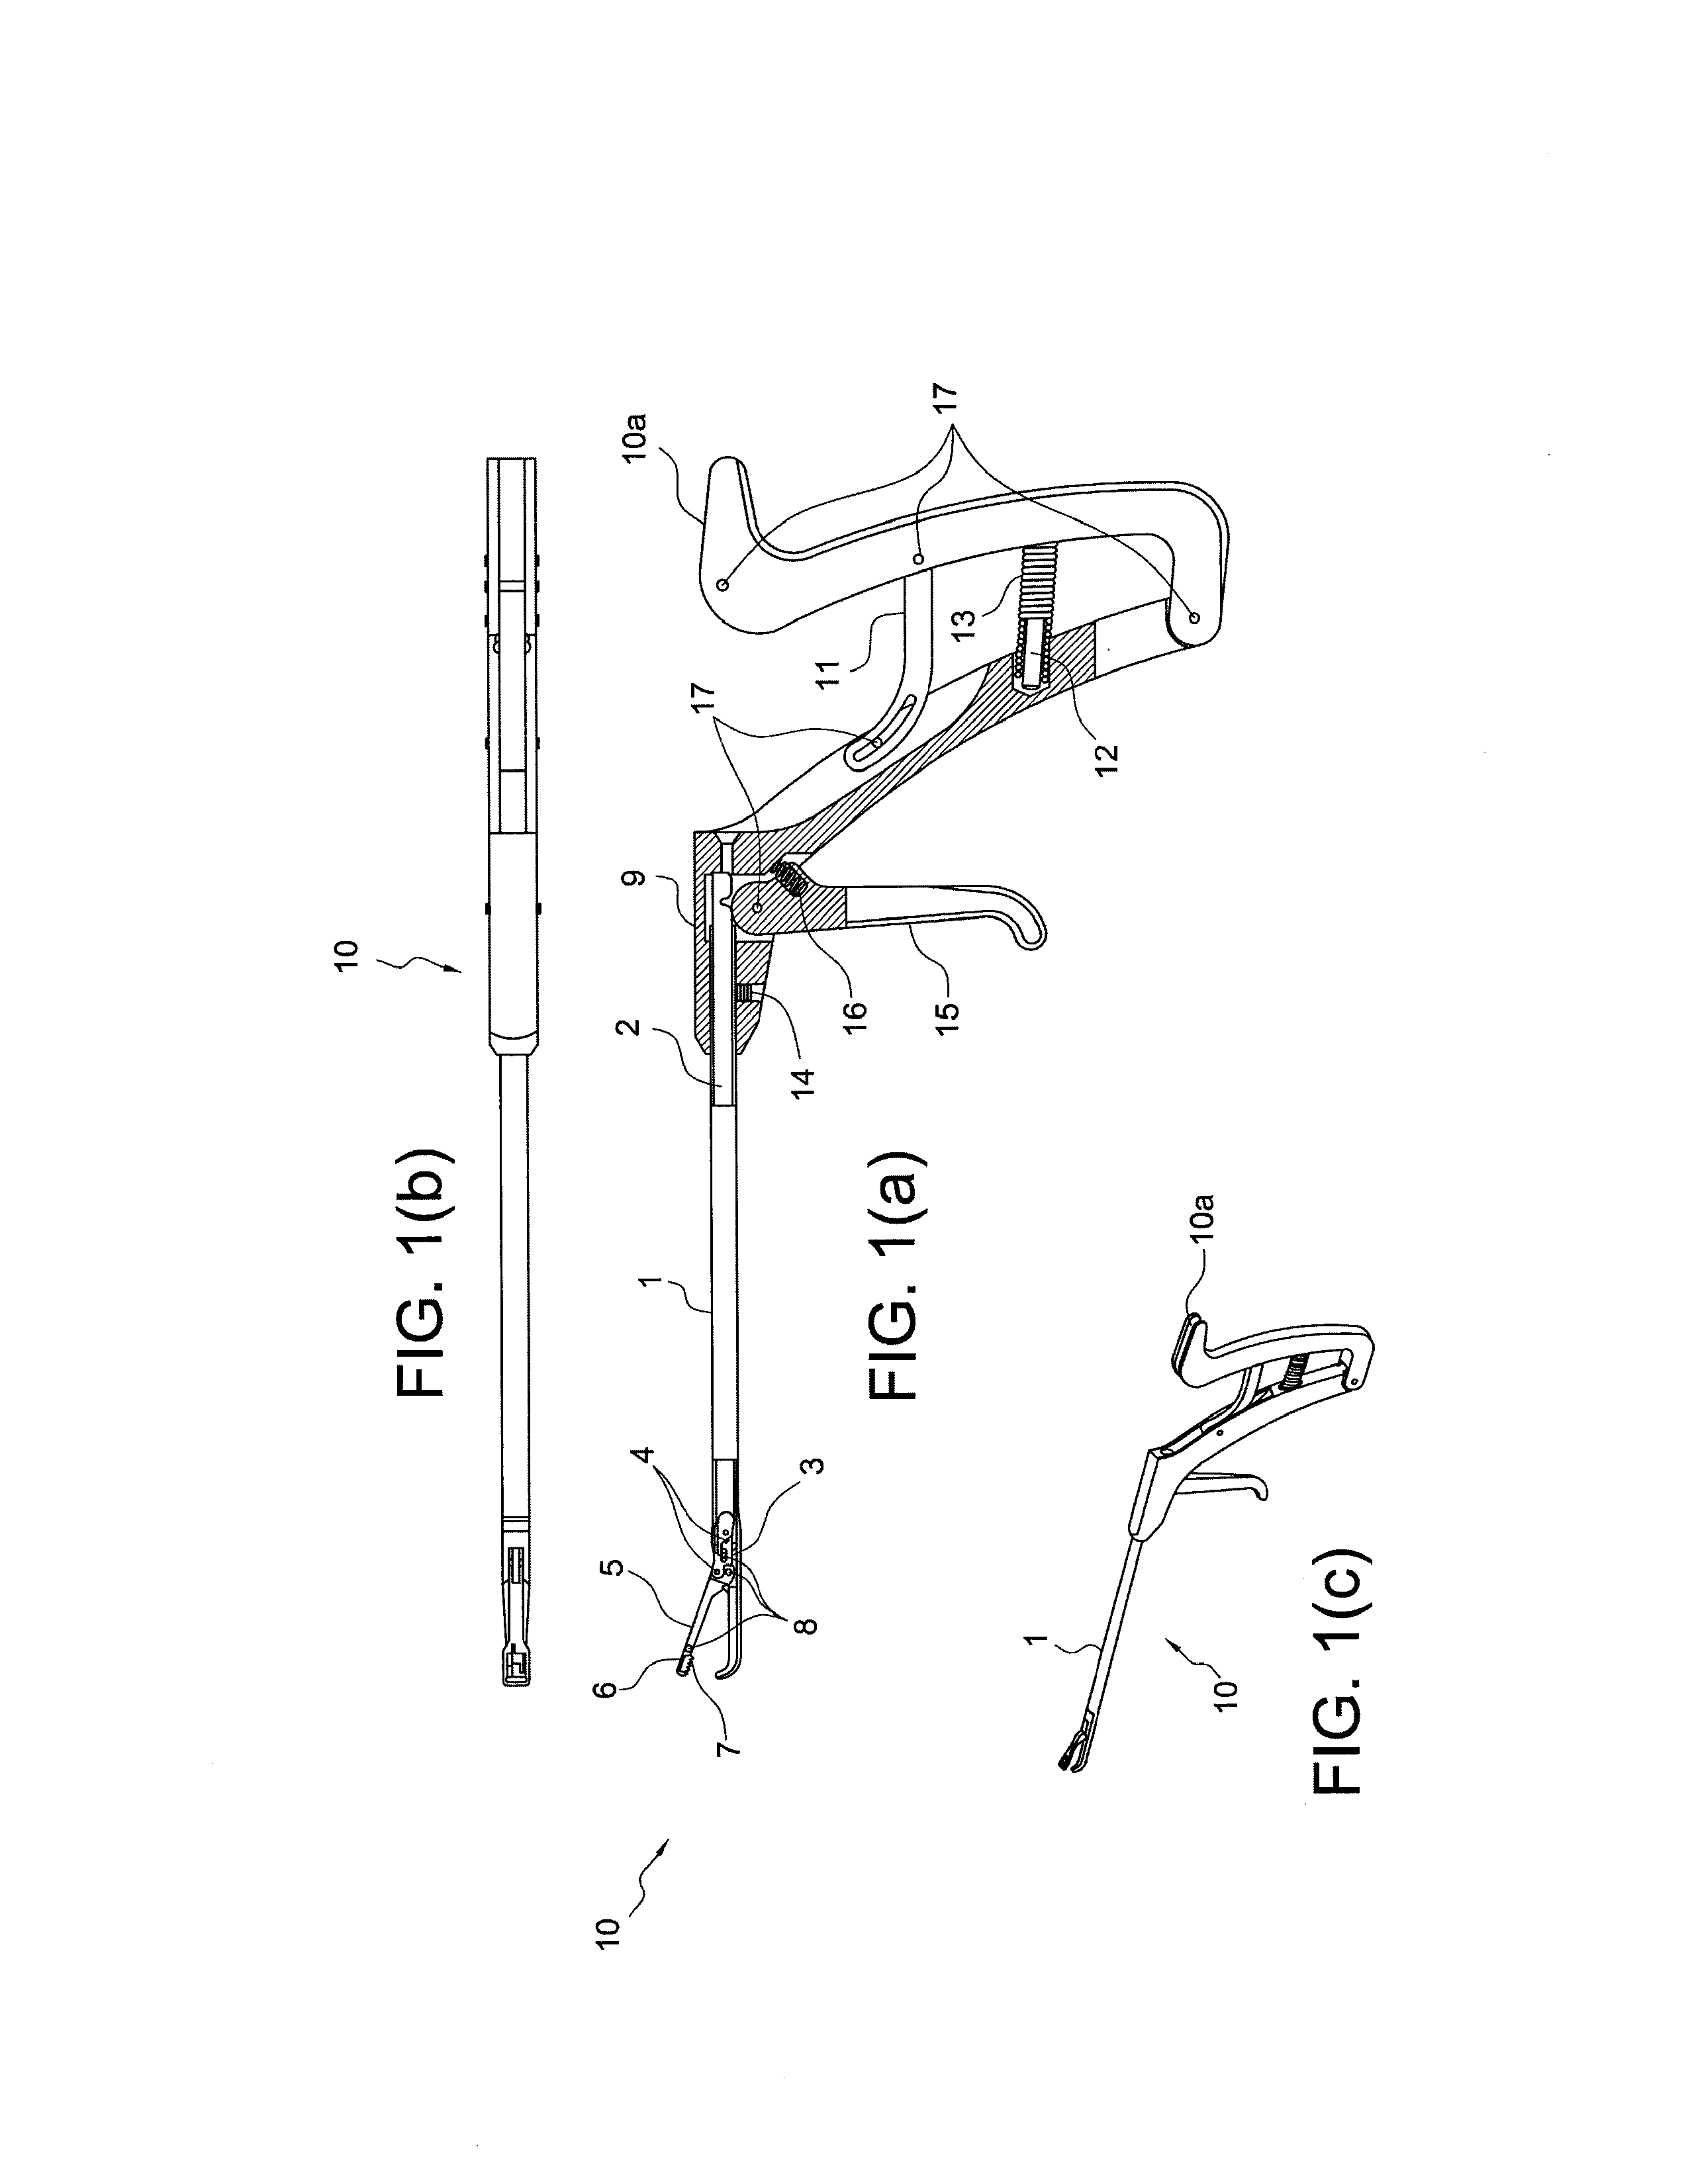 Instruments and methods for complete plantar plate repairs